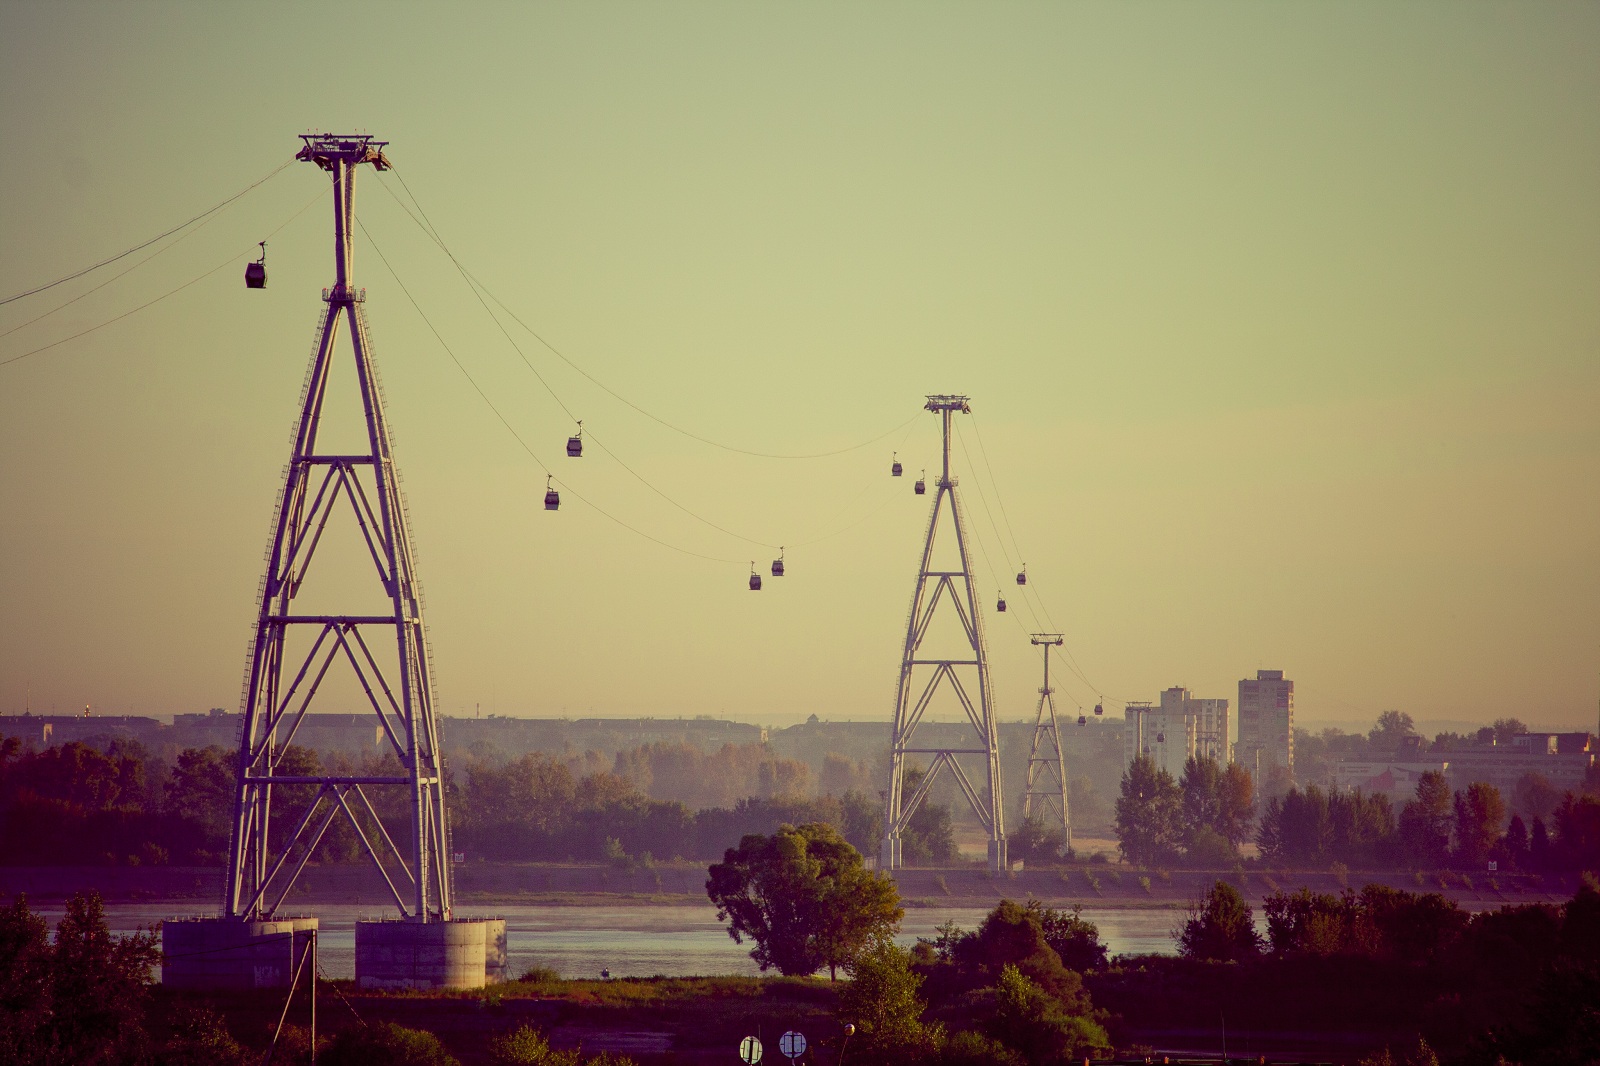 Nizhny_Novgorod_Cableway_a_commuter_cableway_that_connects_the_city_with_its_satellite_Bor_The_ride_peaks_at_82m_and_has_a_861-meter_between_the_supports_the_longest_span_in_Europe.jpg